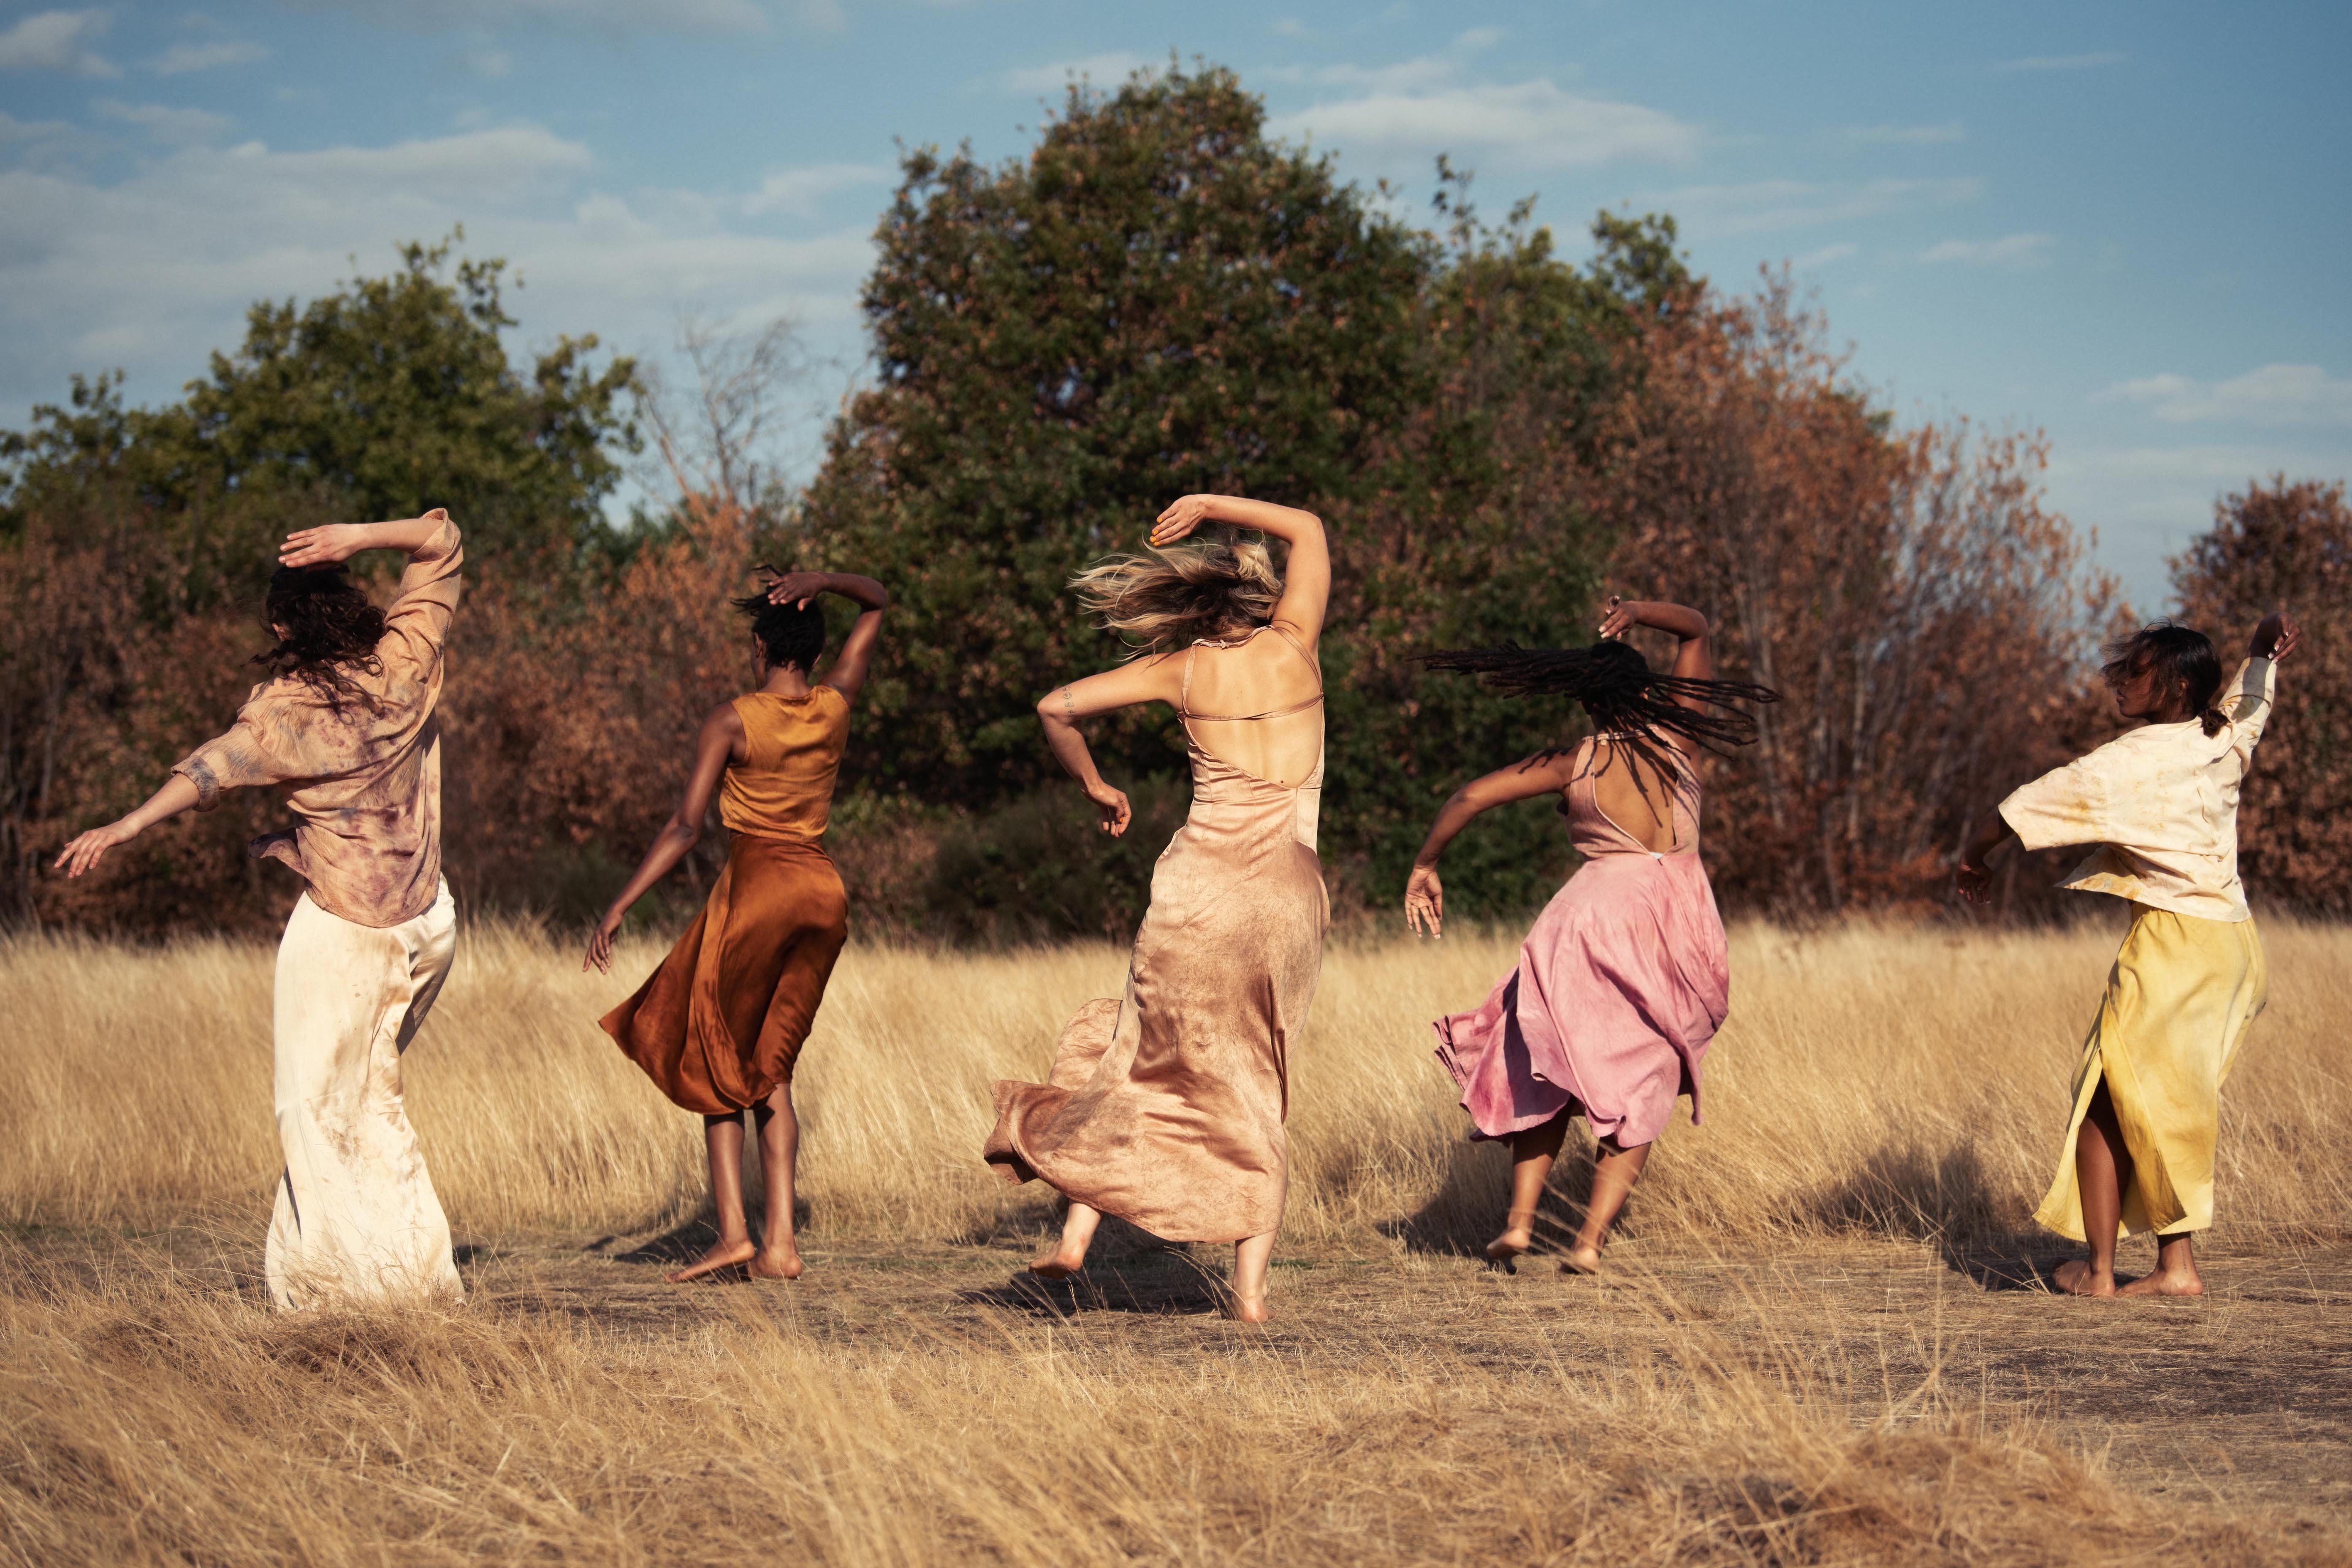 Five people are dancing in the middle of a field with long dry grass and trees behind. They all have their backs to the camera, all have their left arms held out from their bodies and bent at the elbow and right arm held out and raised above their head, their hair is swishing, the dance move looks energetic. They are dressed in shades of brown, pink, beige and orange.